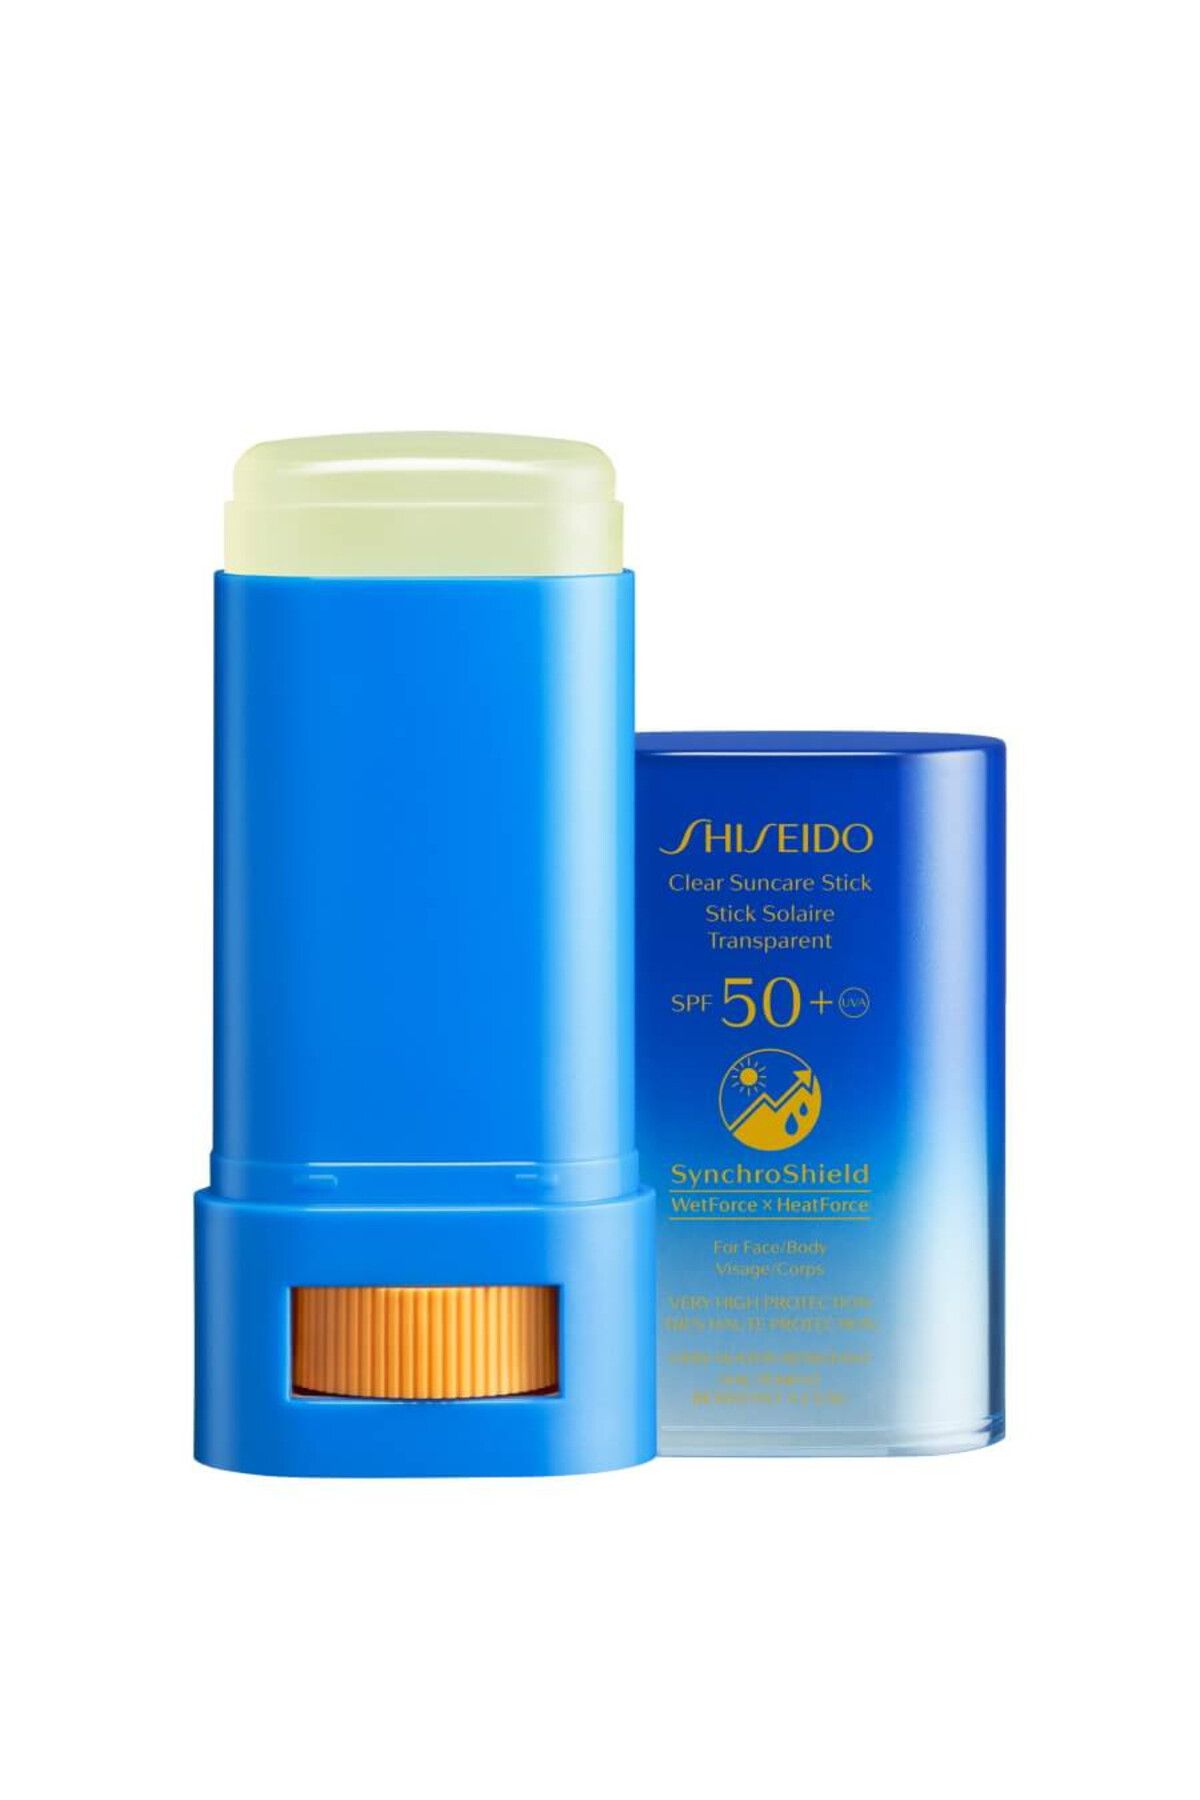 Shiseido SPF 50+ Protection Stick Shape Transparent Sunscreen for Face and Body 20 gr